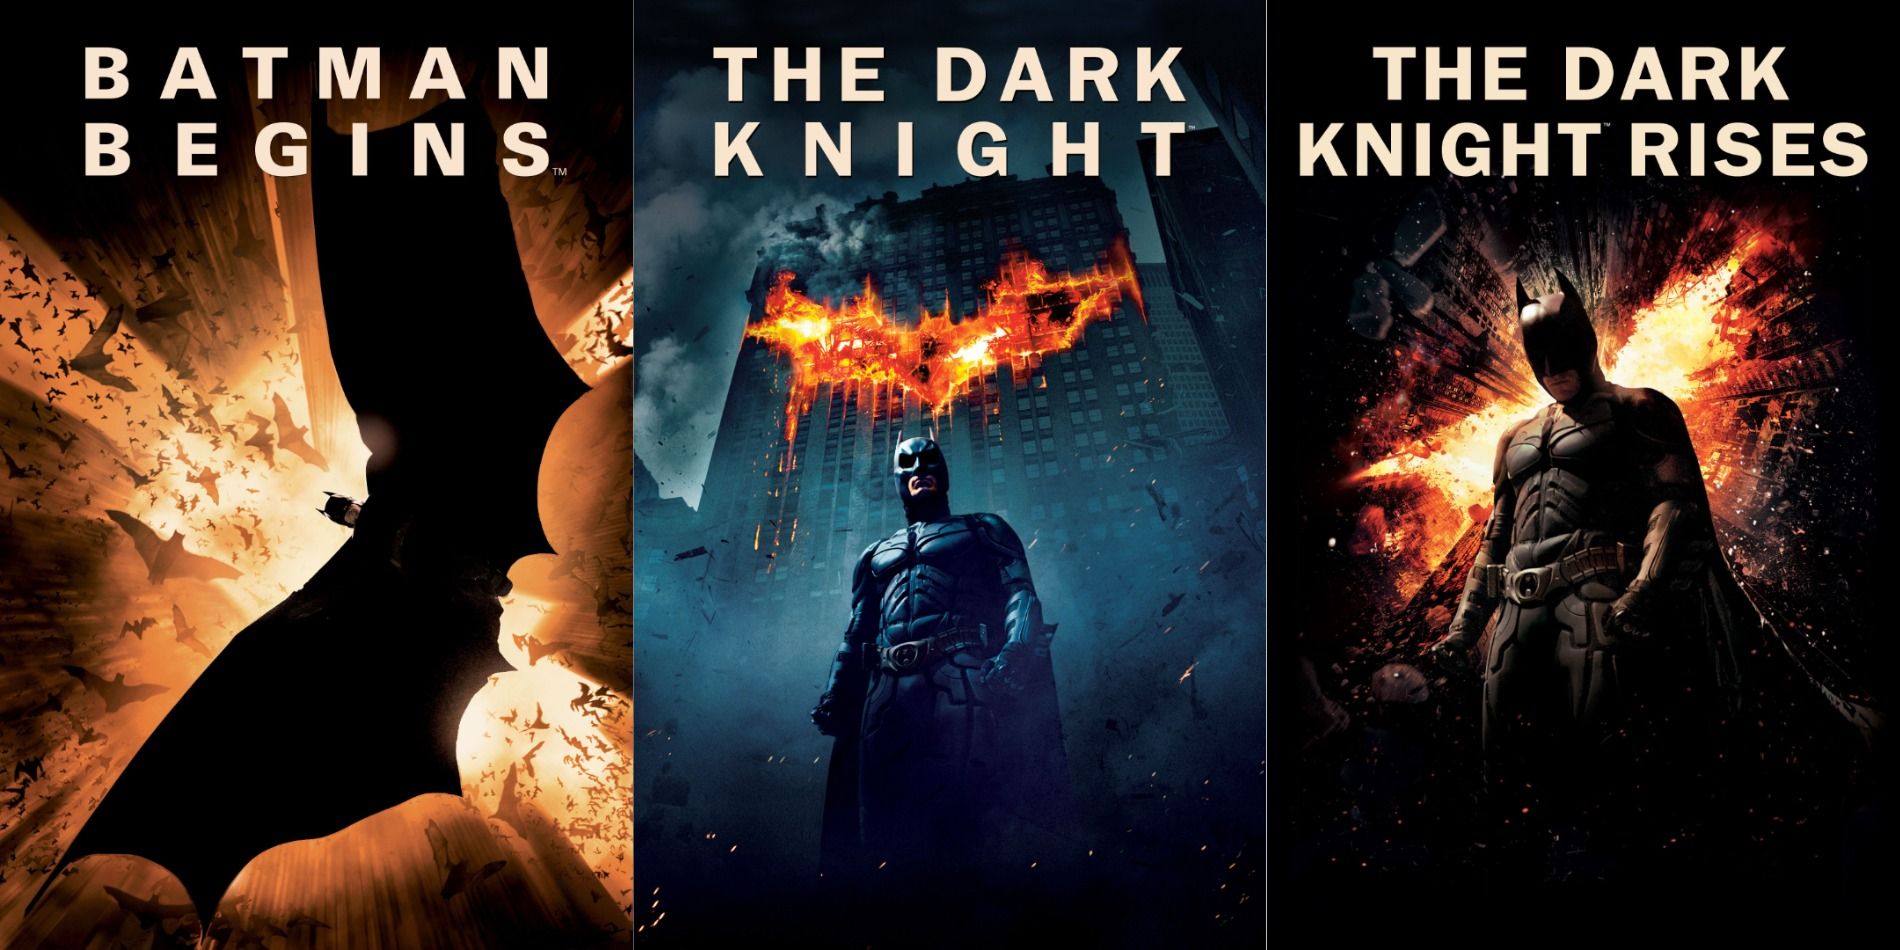 The Dark Knight Trilogy posters